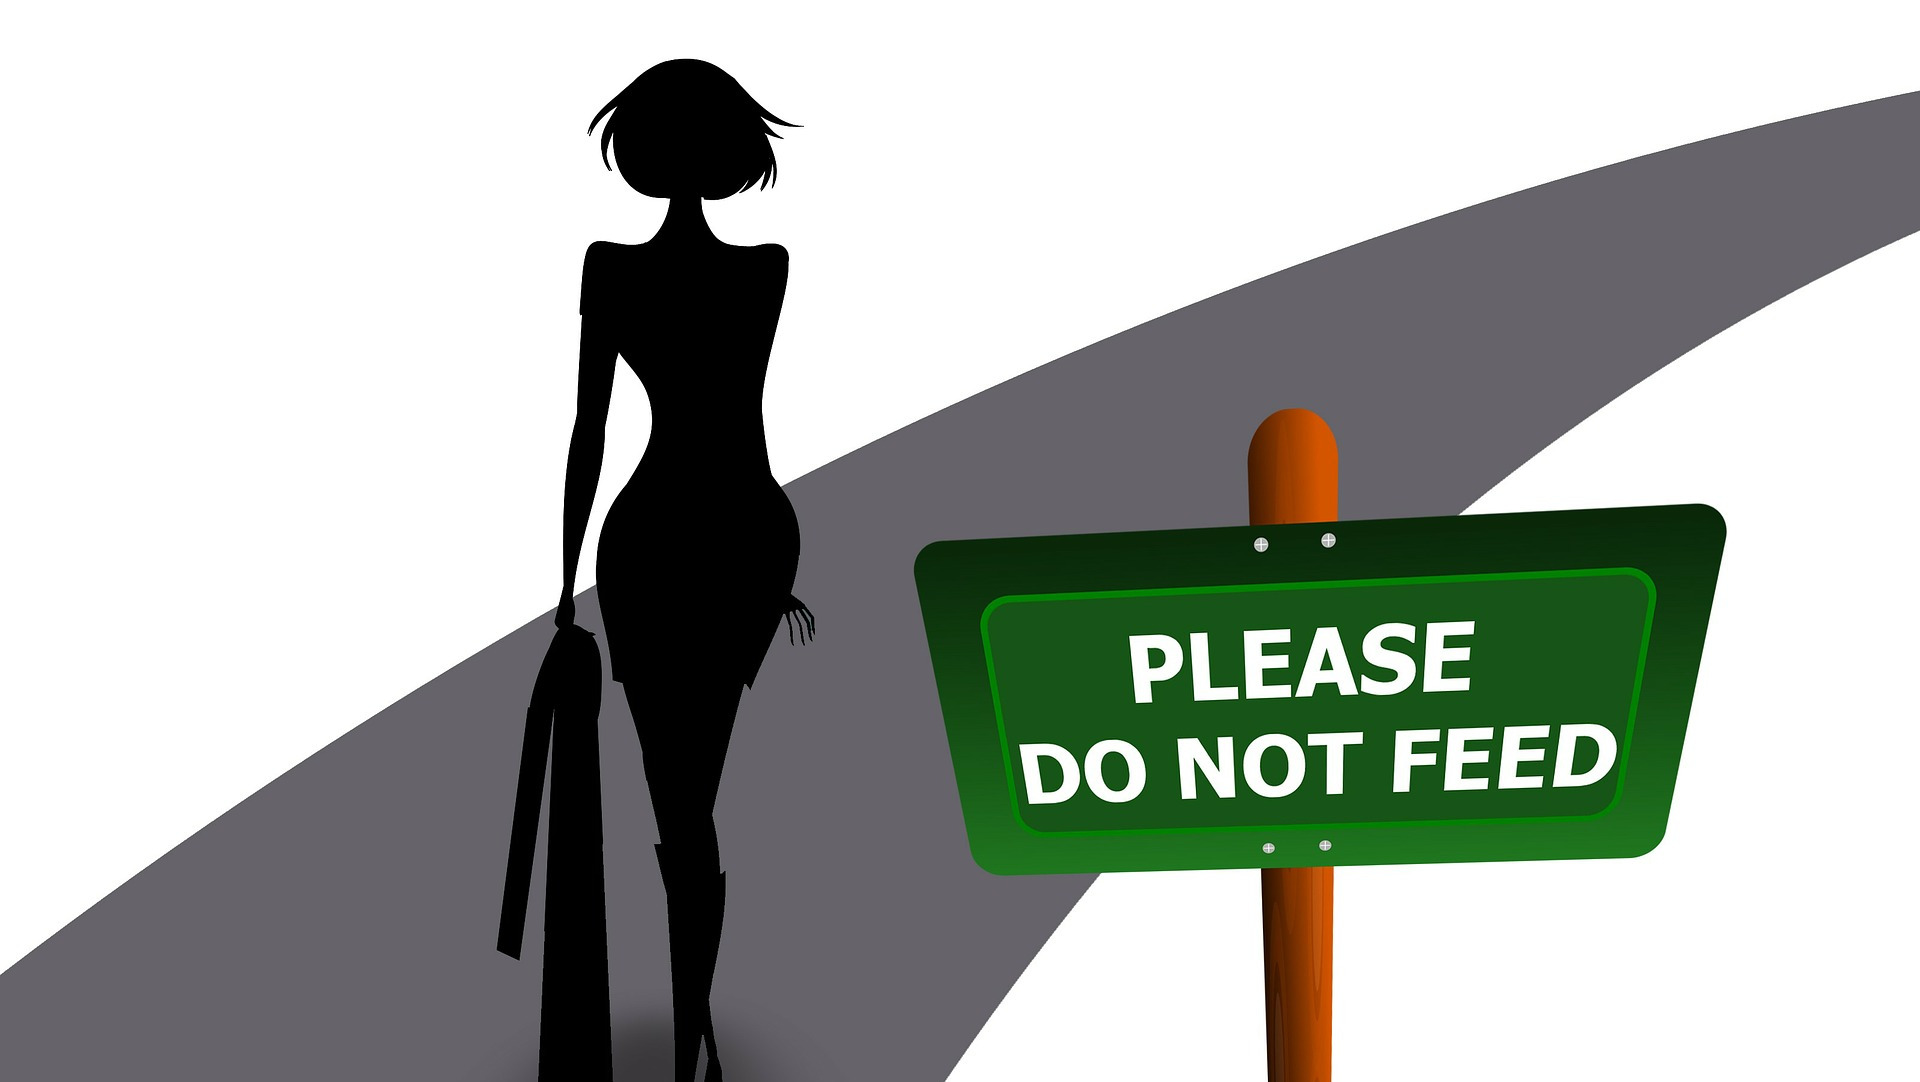 Silhouette of woman walking on path with a do not feed sign.